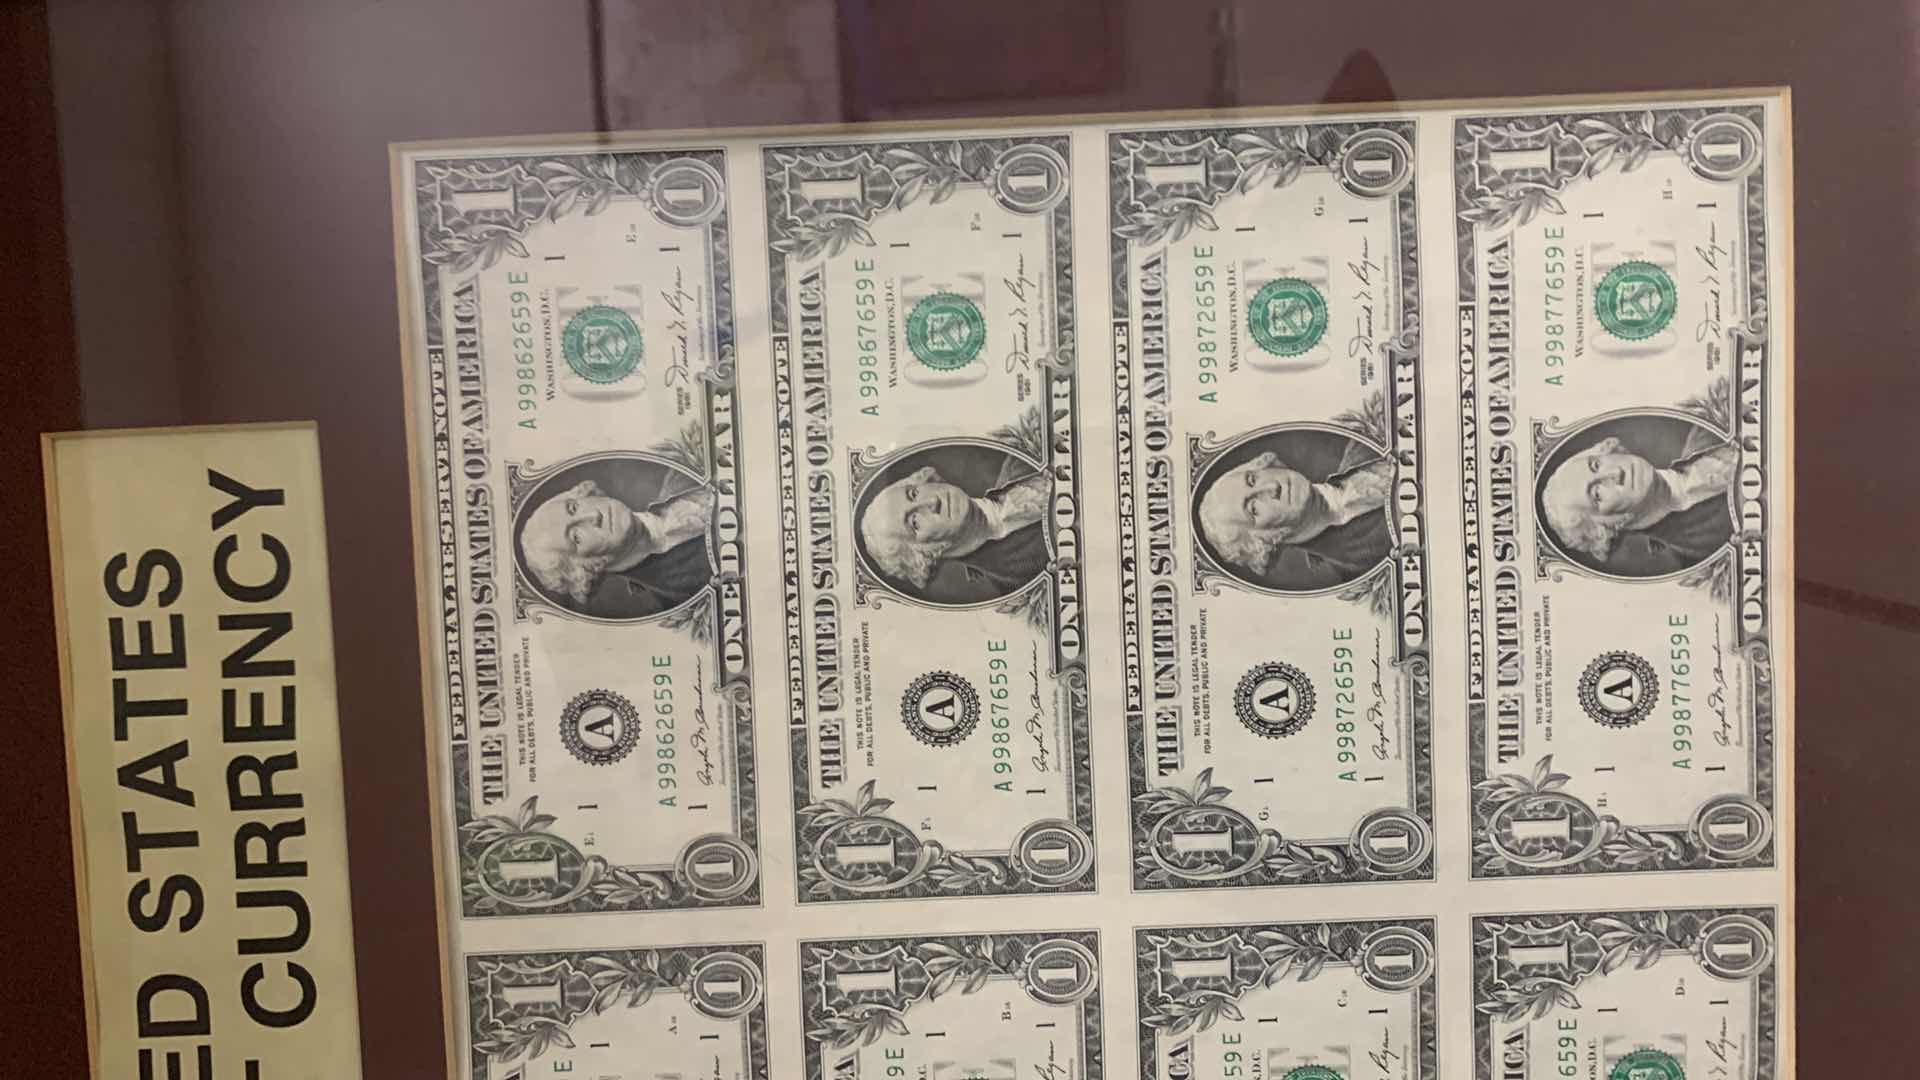 Photo 3 of FRAMED UNITED STATES UNCUT CURRENCY 8- $1 BILLS